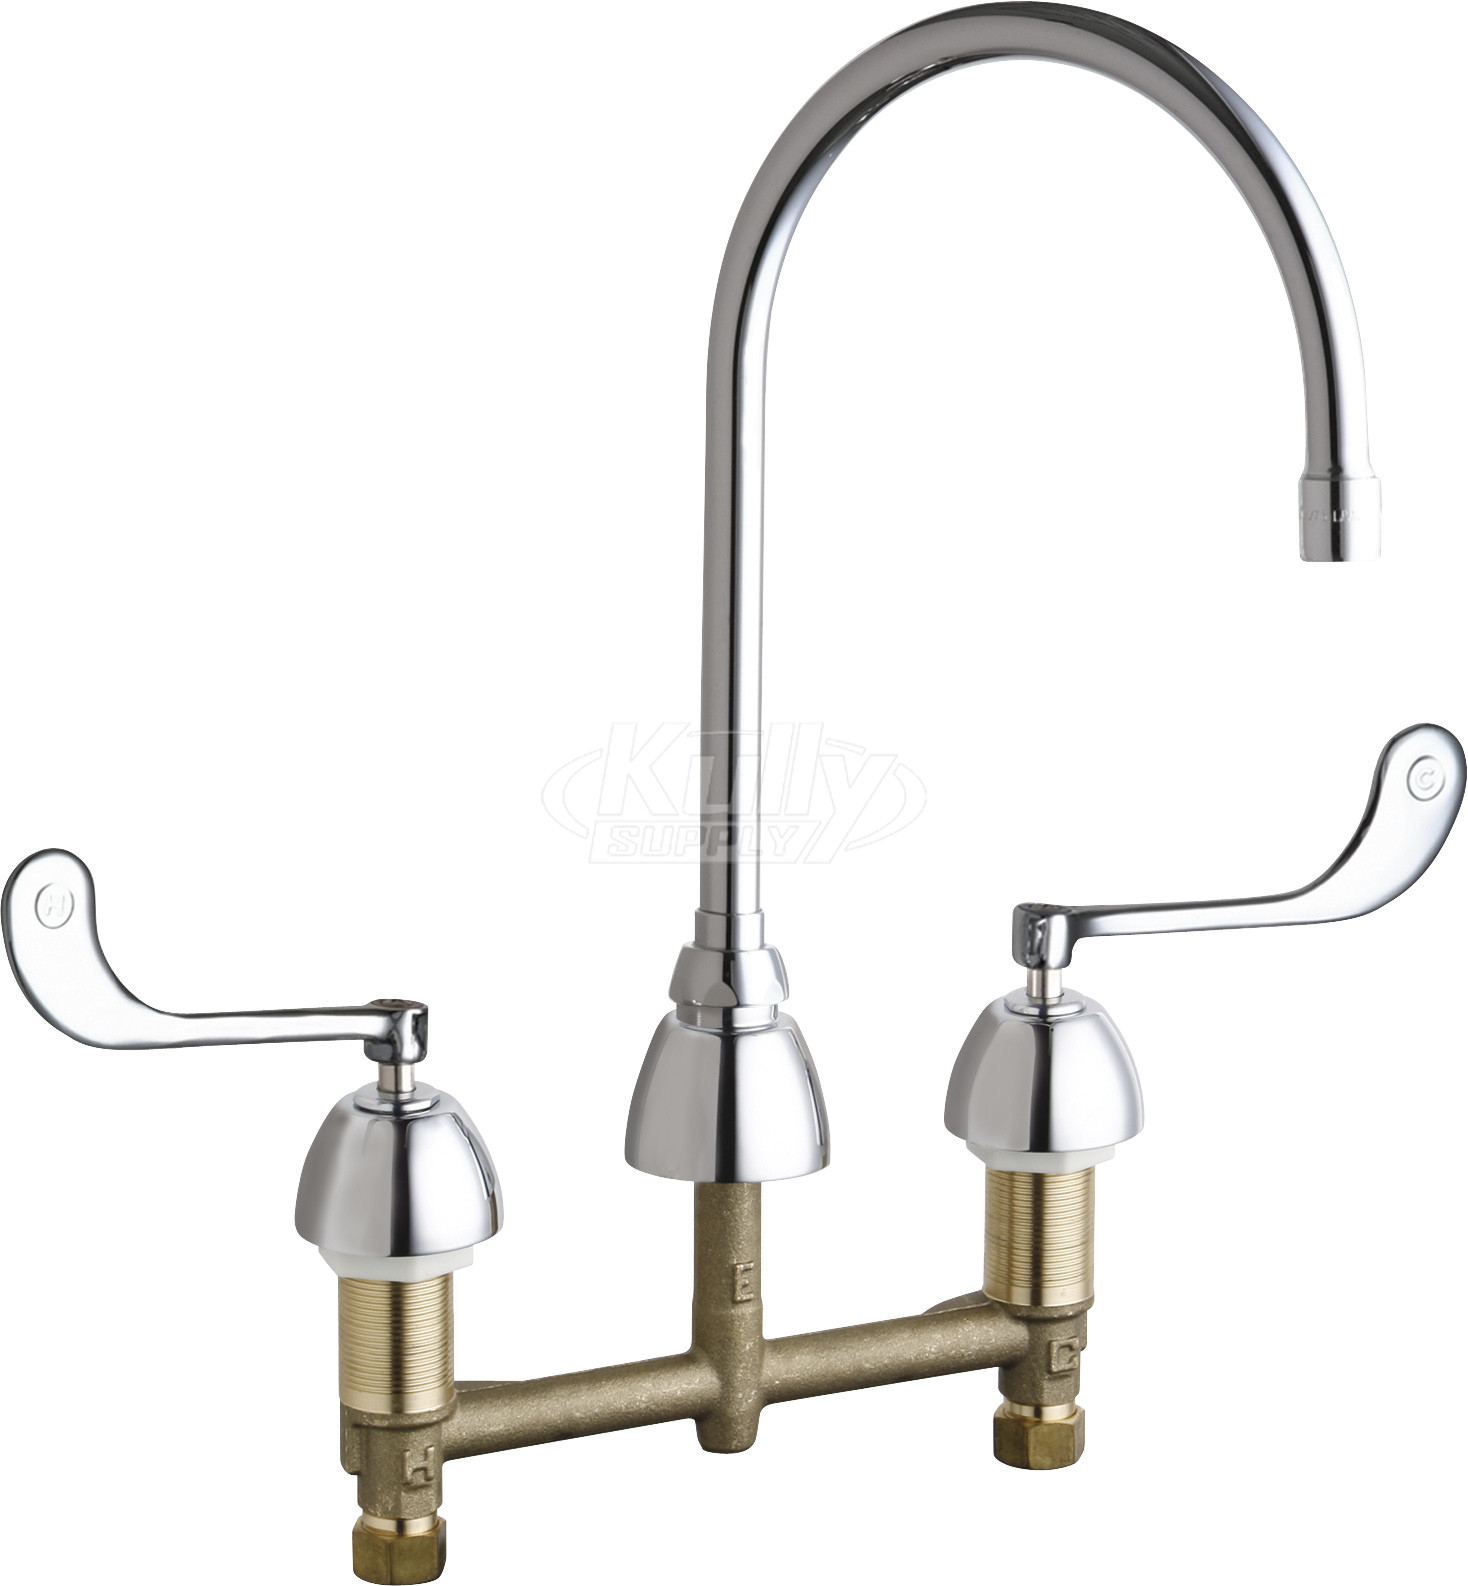 Chicago 201-AGN8AE3-319AB E-Cast Concealed Kitchen Sink Faucet